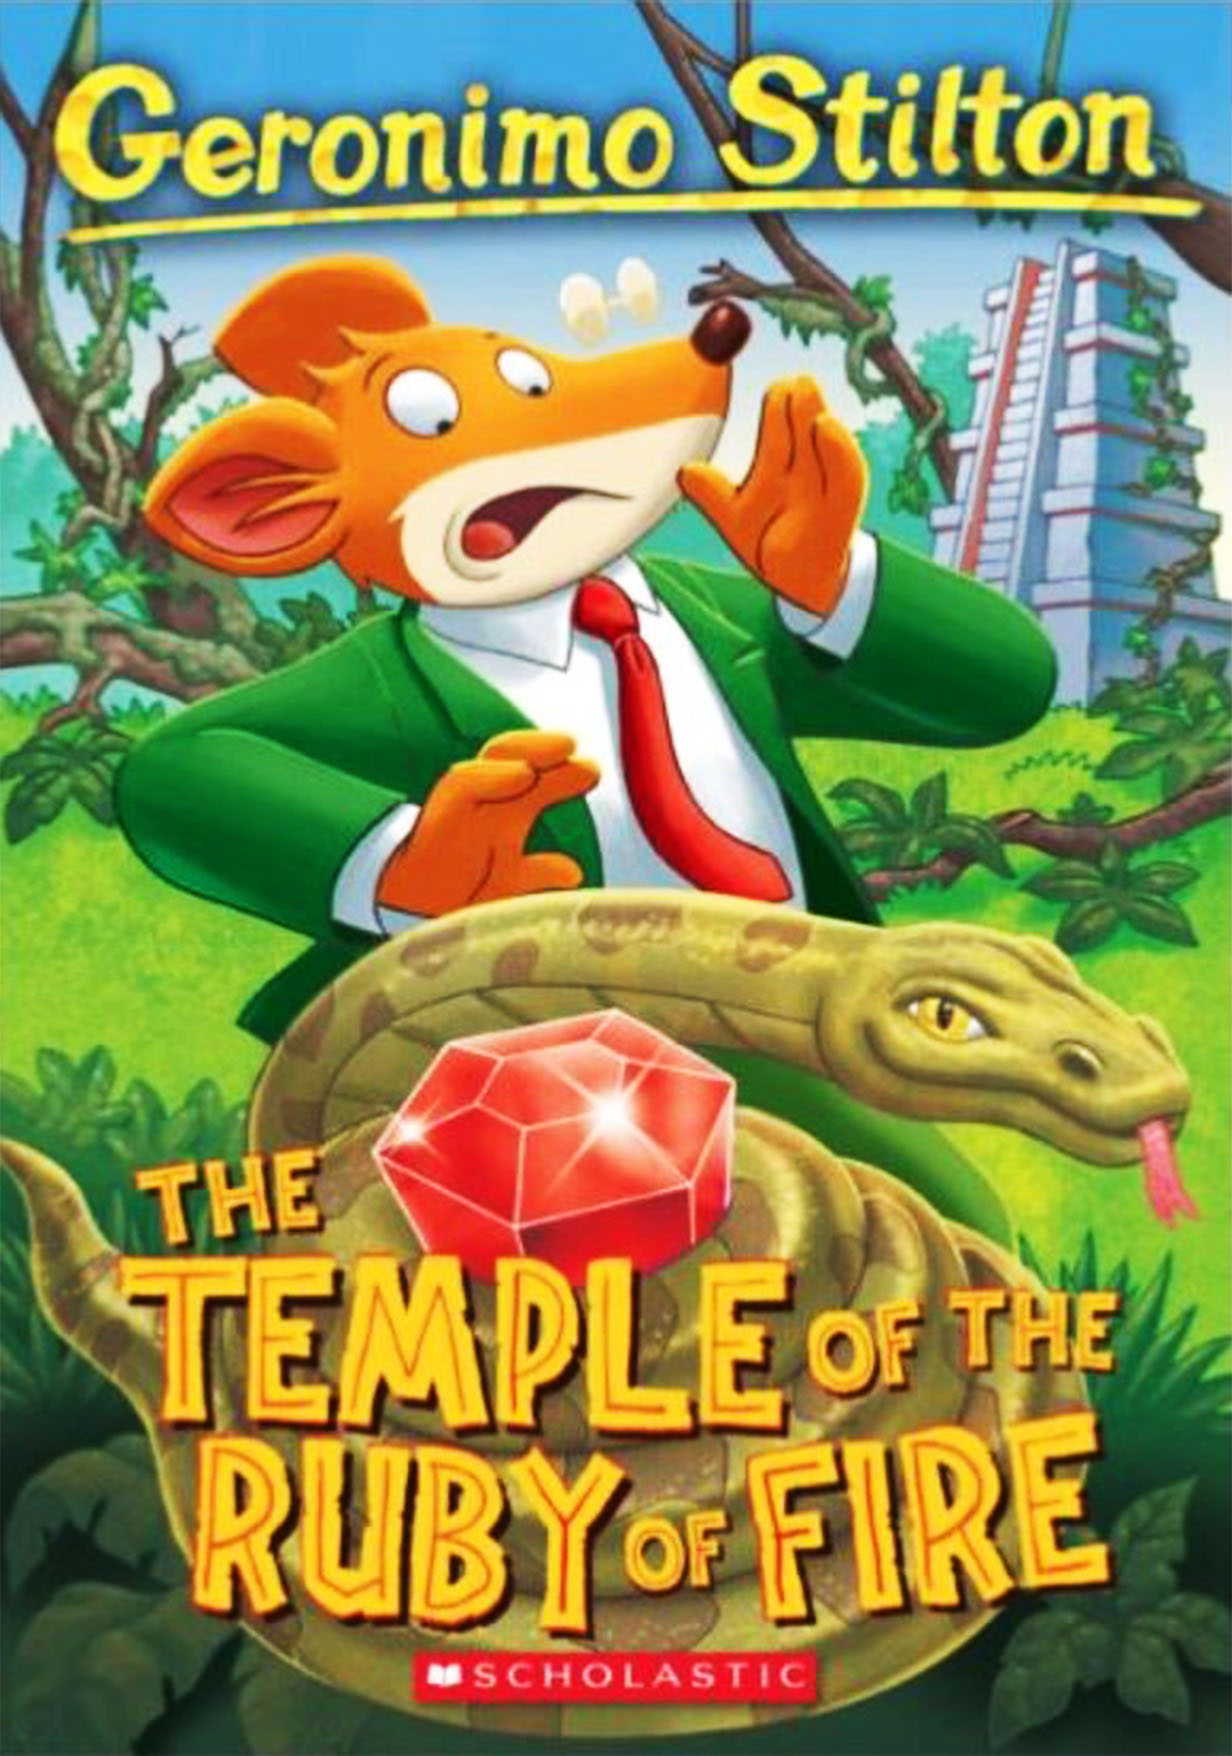 Geronimo Stilton Series: The Temple of The Ruby of Fire 14 (পেপারব্যাক)